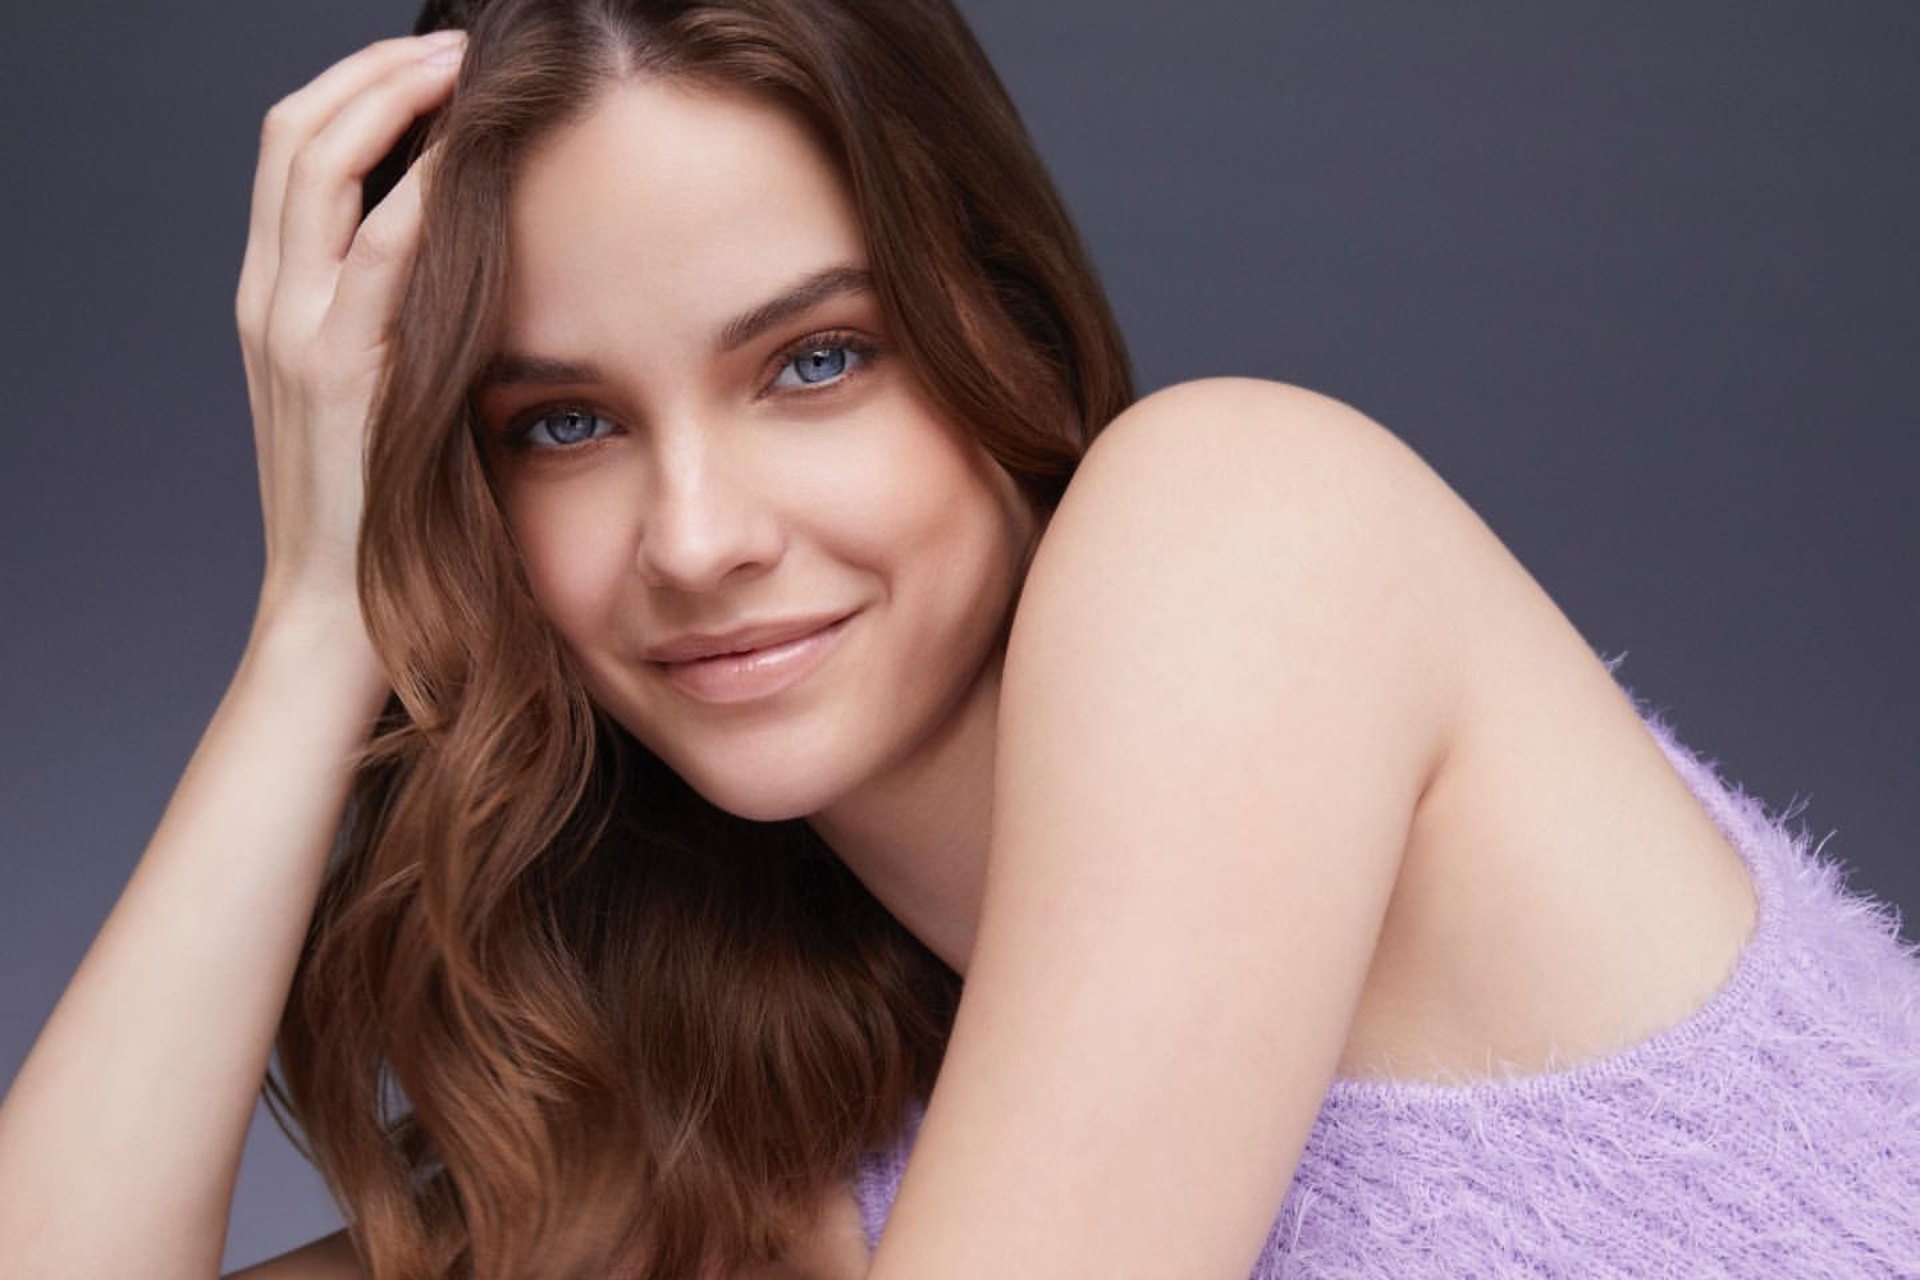 New Barbara Palvin Model 2021 HD Wallpaper, HD Celebrities 4K Wallpapers,  Images, Photos and Background - Wallpapers Den